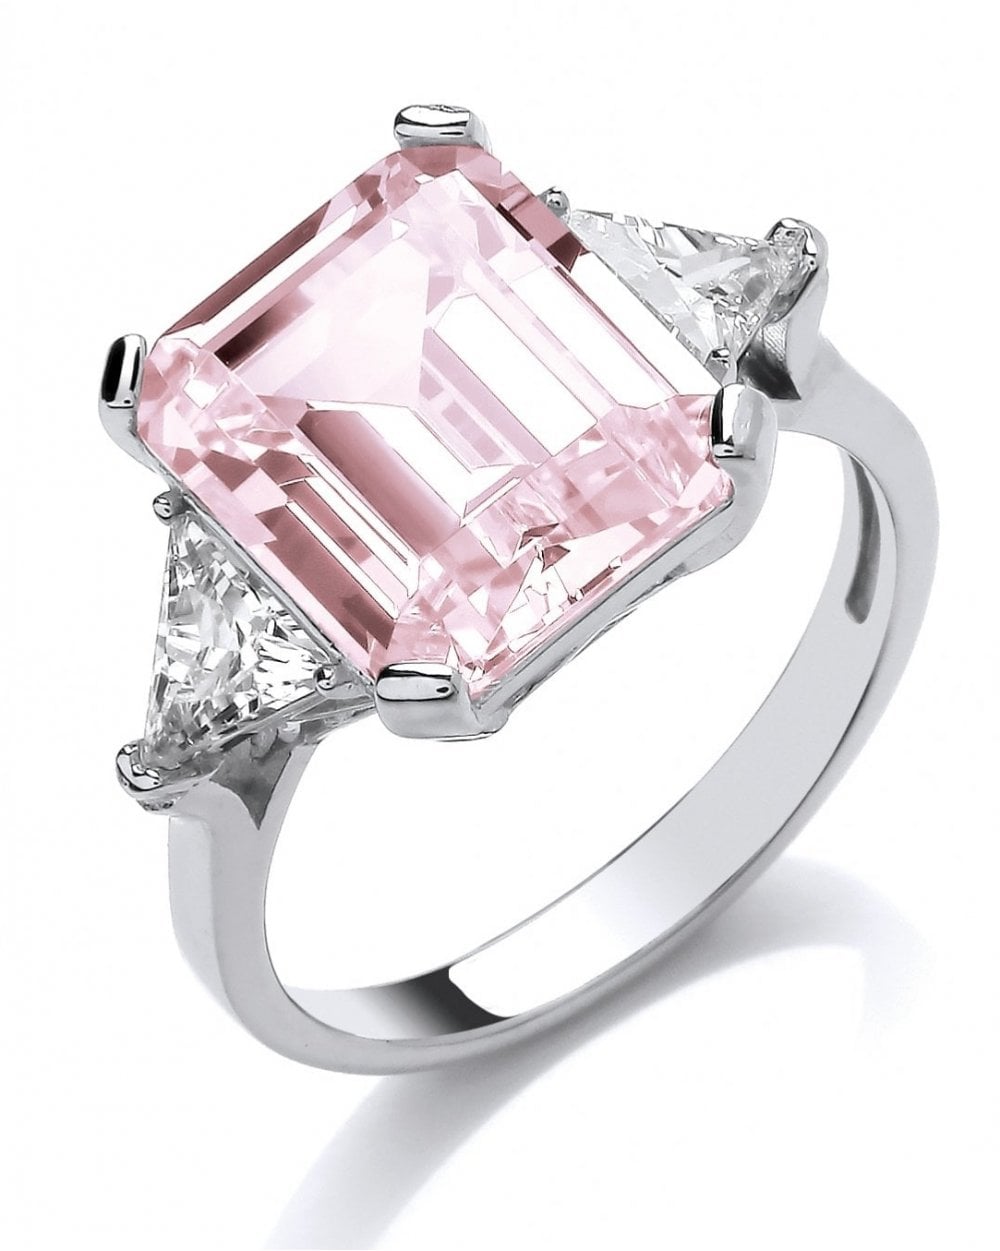 Silver & Pink Diamond Cubic Zirconia Vintage Style Ring